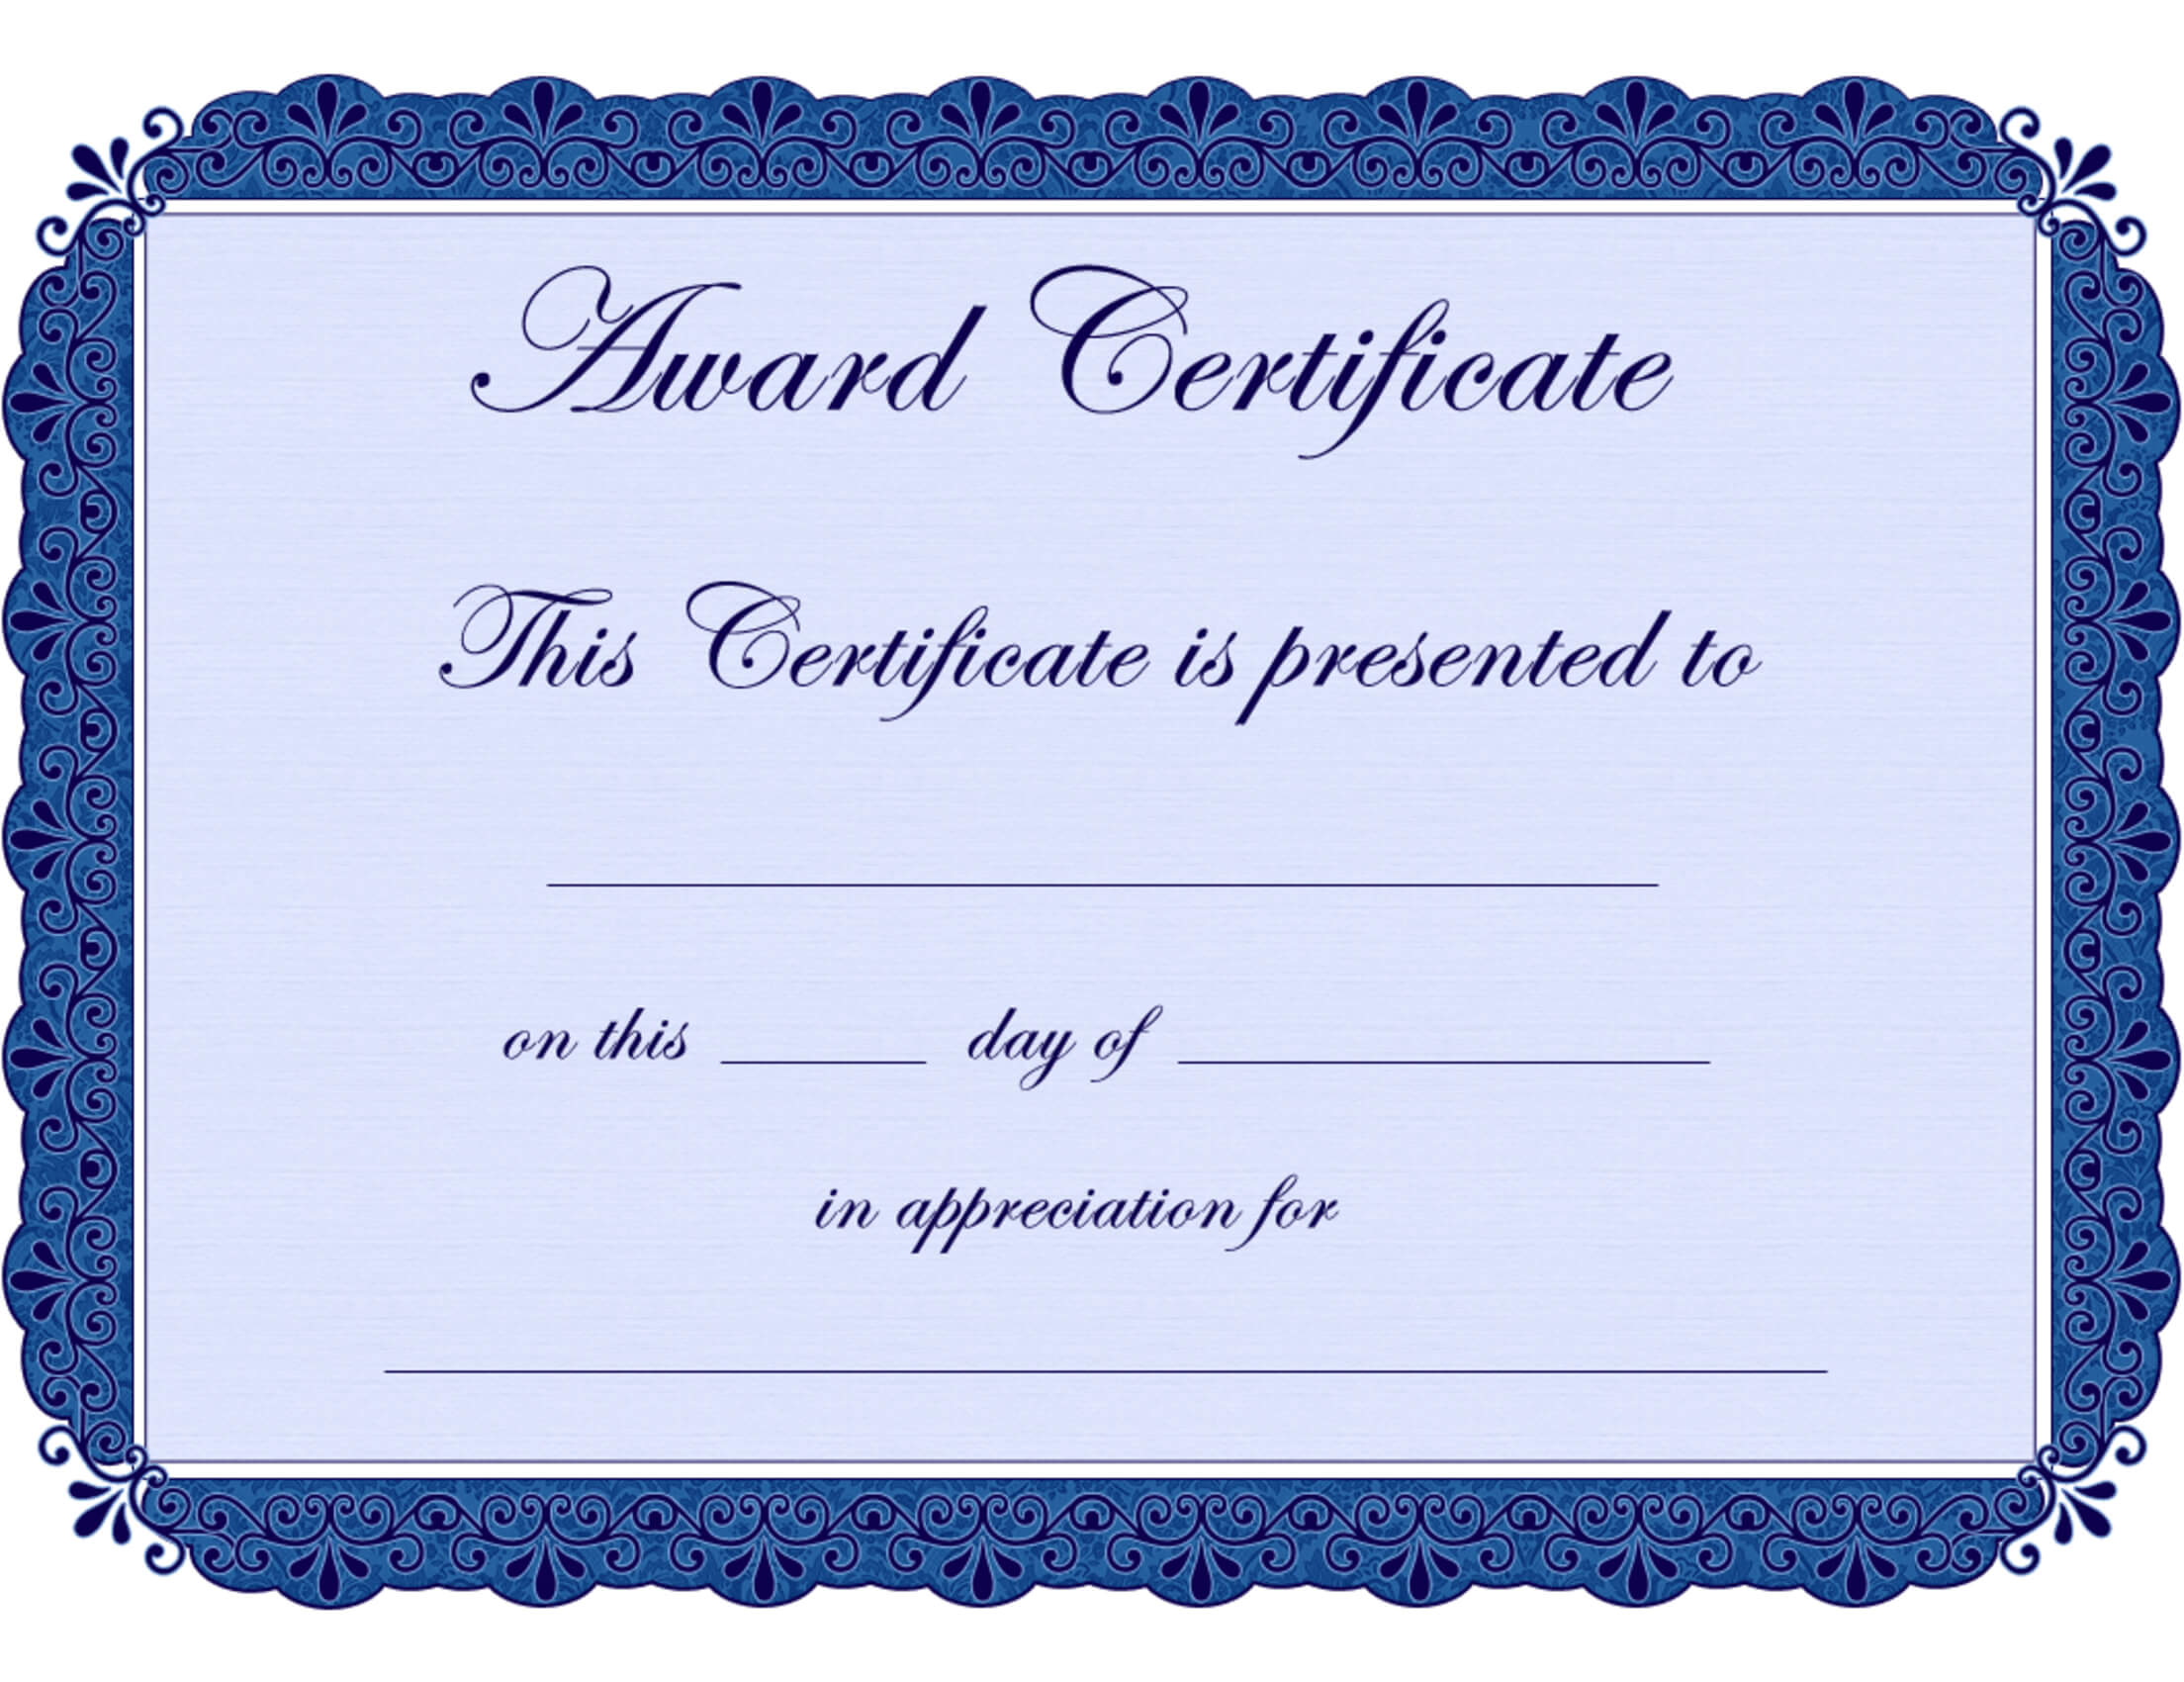 Free Printable Award Certificate Borders |  Award With Free Funny Award Certificate Templates For Word